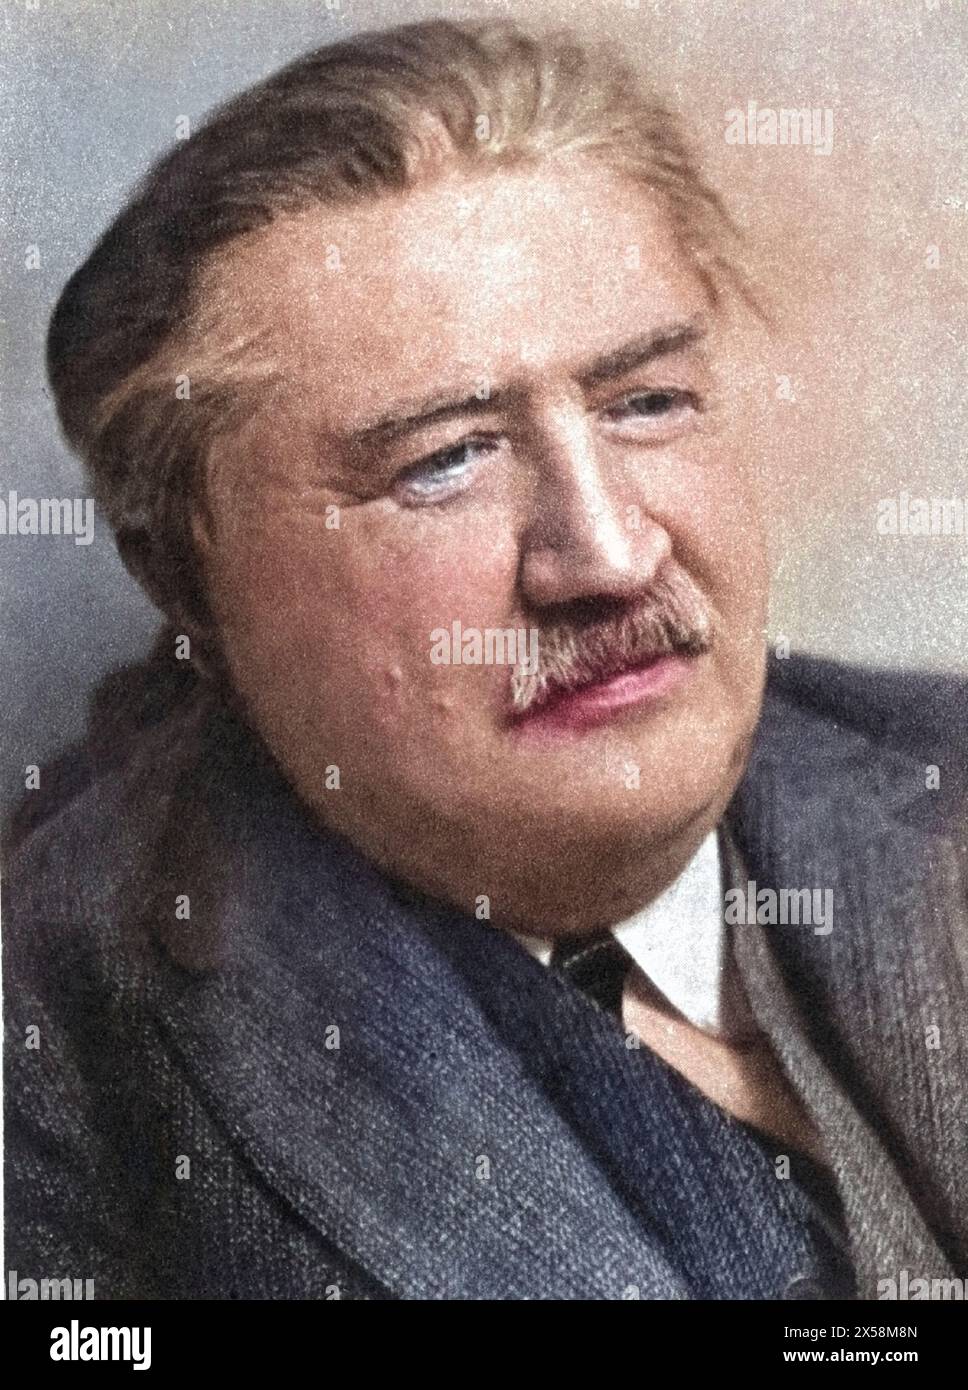 Suk, Josef, 4.1.1874 - 29.5.1935, Czech composer, violinist, portrait, ADDITIONAL-RIGHTS-CLEARANCE-INFO-NOT-AVAILABLE Stock Photo